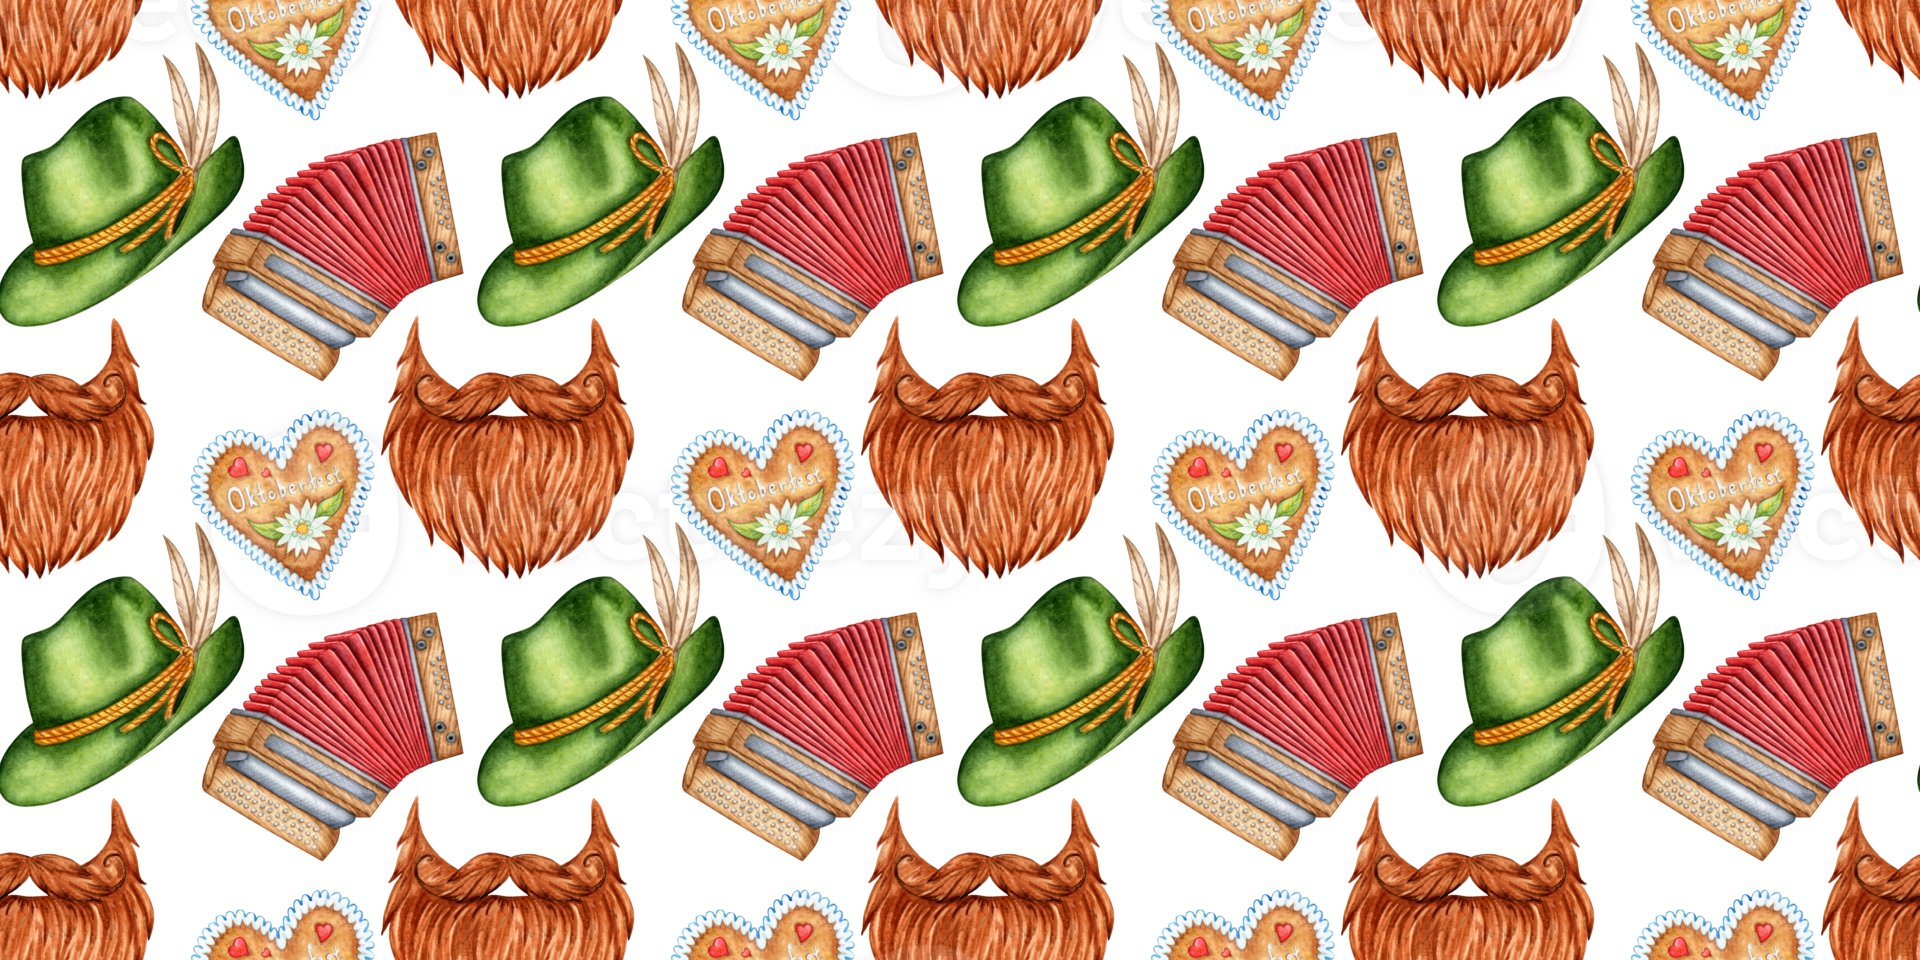 Oktoberfest pattern of watercolor illustrations with hat, beard, accordion, gingerbread. Harvest festival, beer festival. Compositions for posters, banners, flyers, design png